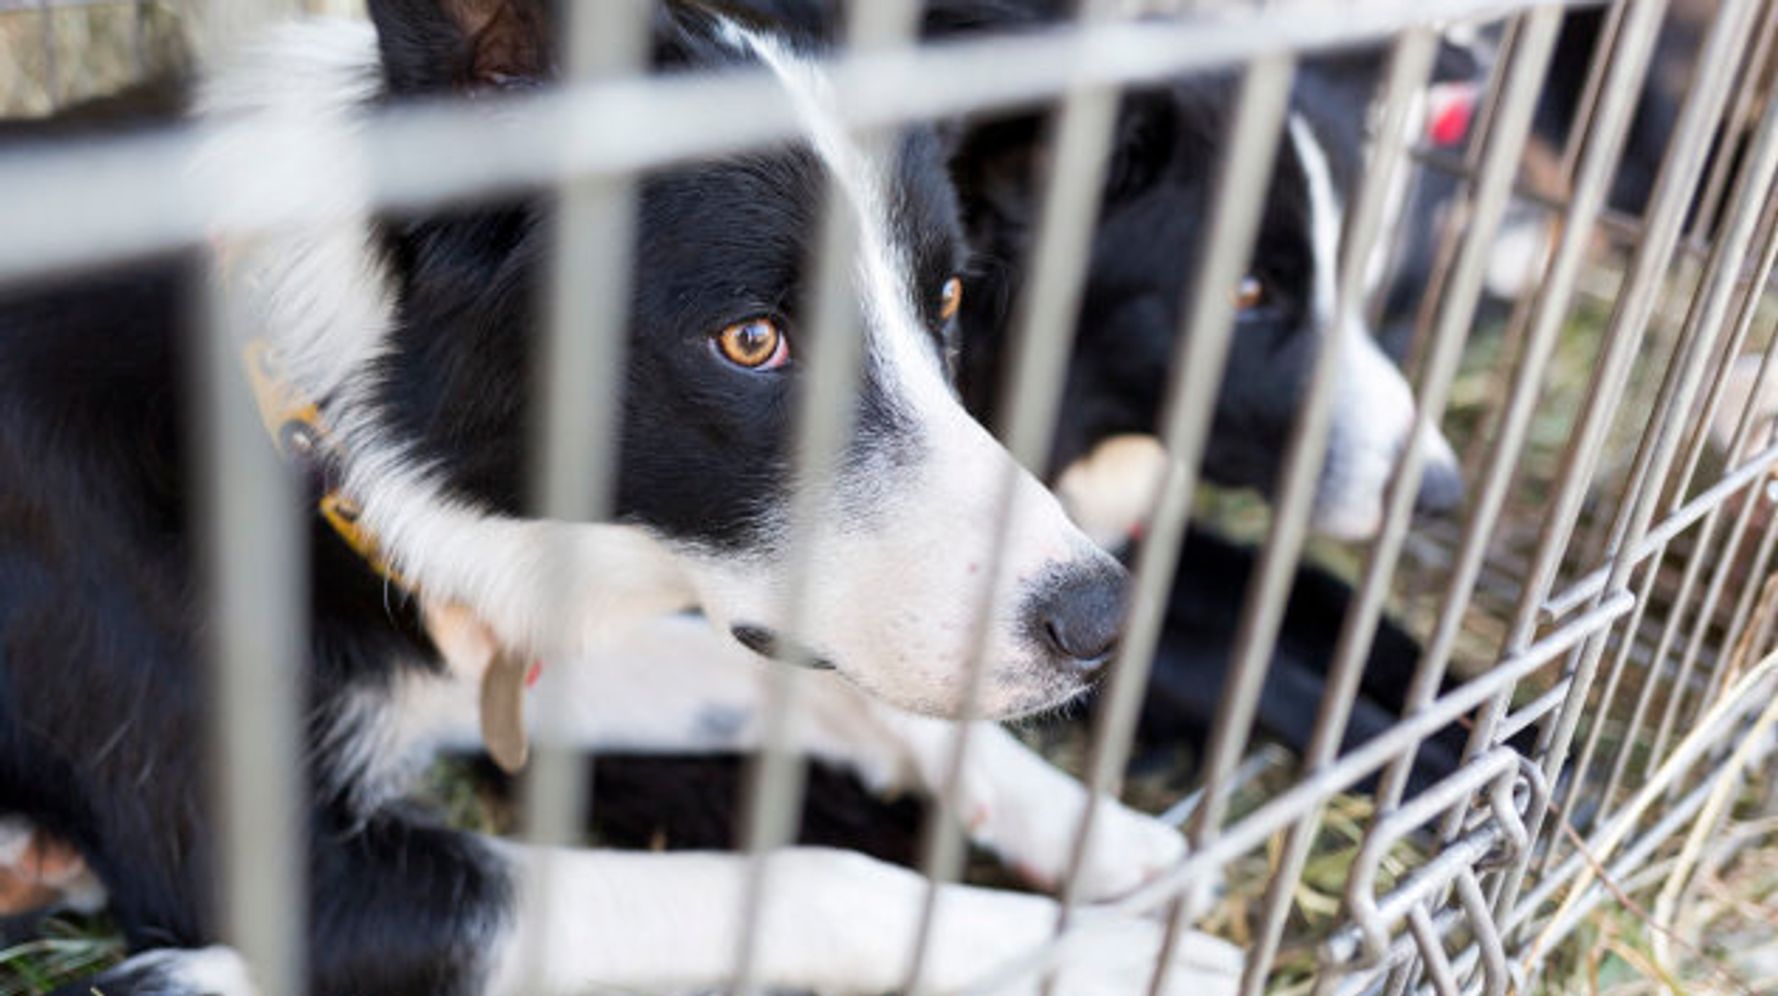 Shelter Animals Should Never End Up In Research Labs | HuffPost News